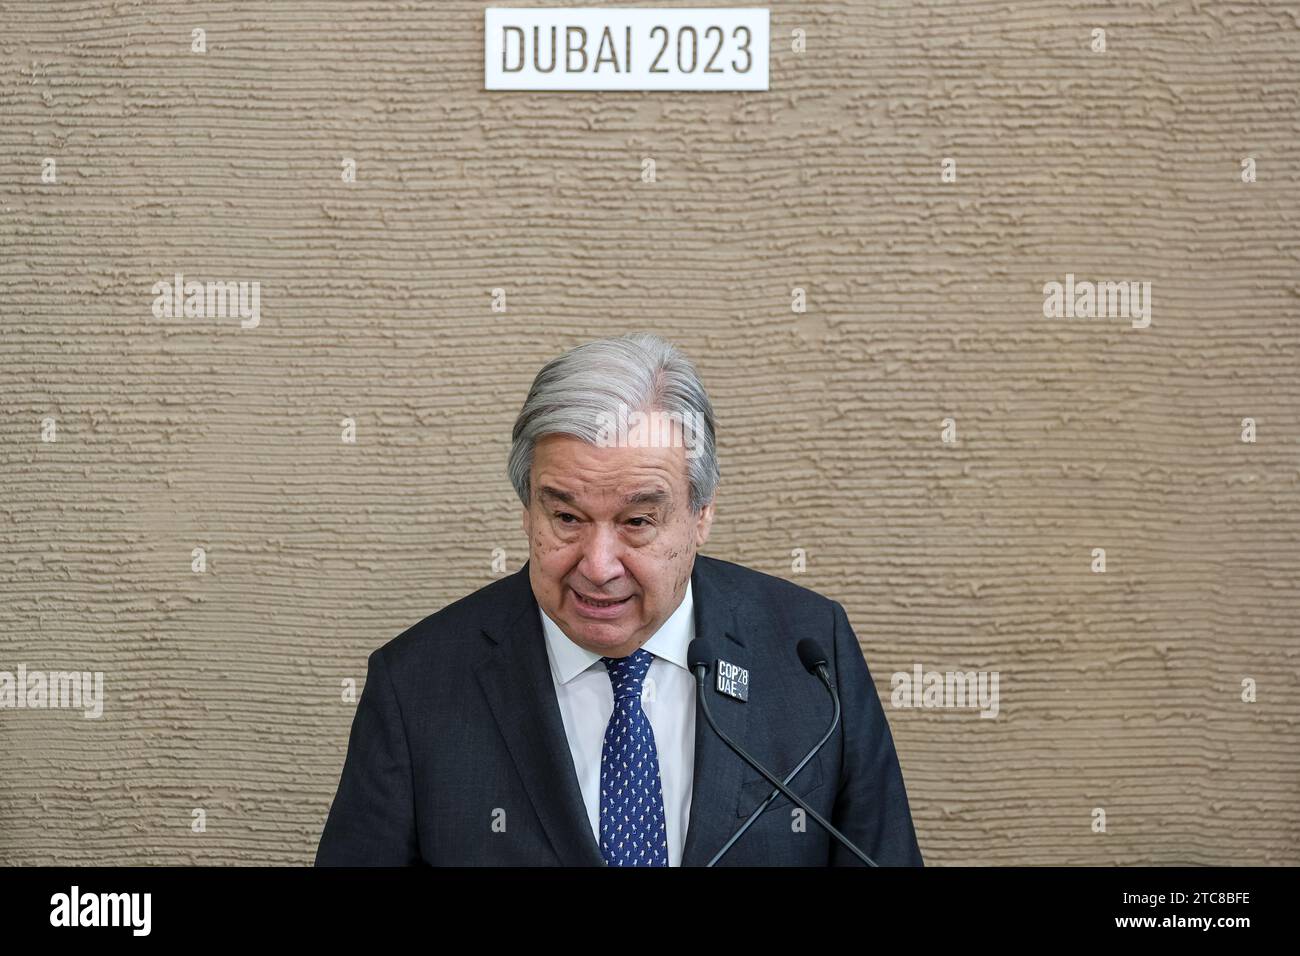 UN Secretary-General António Guterres speaks to media during a stakeout during the COP28, UN Climate Change Conference, held by UNFCCC in Dubai Exhibition Center, United Arab Emirates on December 11, 2023. Stock Photo